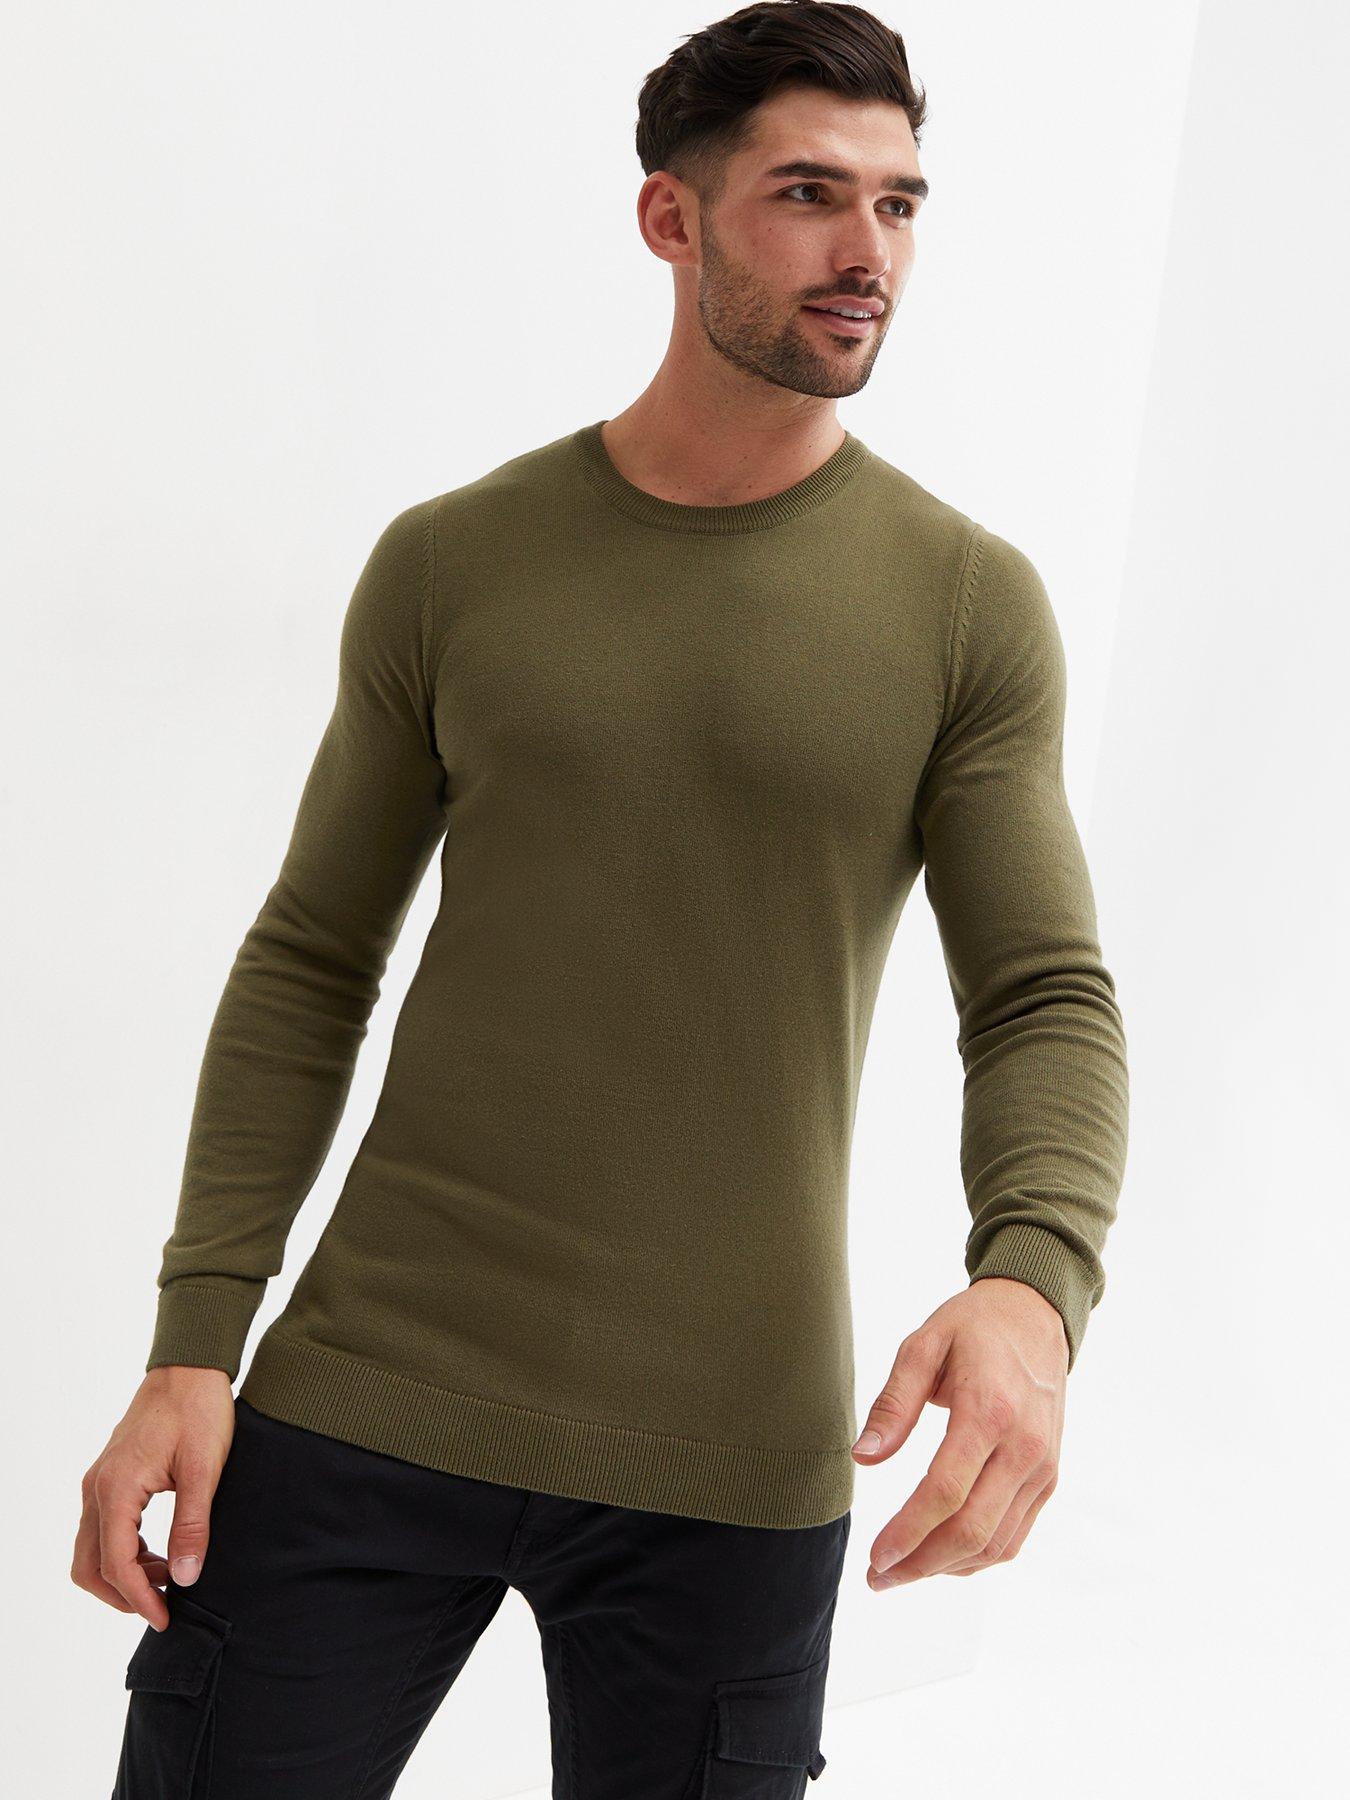 New Look Khaki Fine Knit Crew Neck Muscle Fit Jumper | very.co.uk